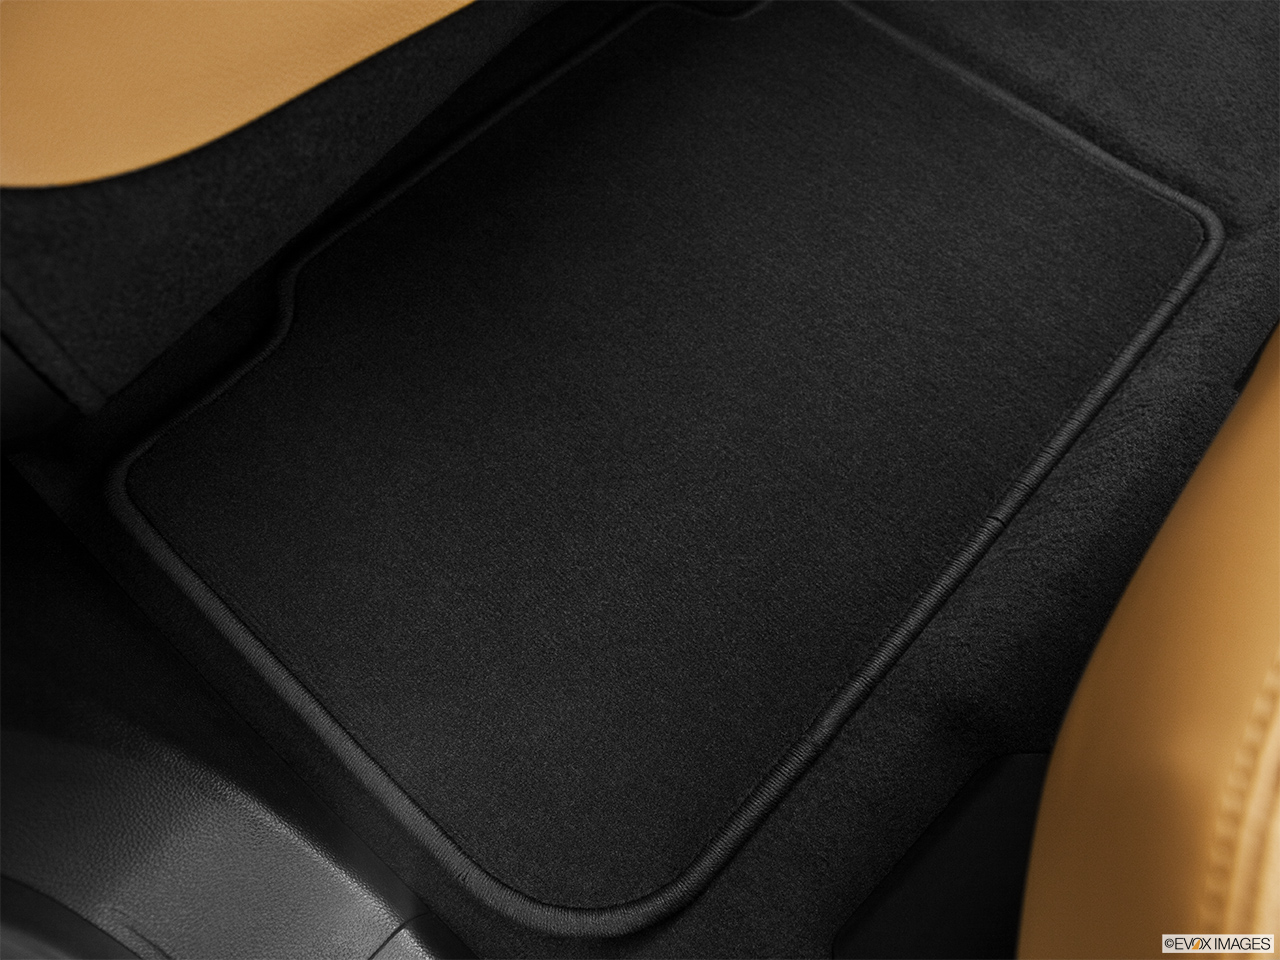 2014 Cadillac SRX Luxury Rear driver's side floor mat. Mid-seat level from outside looking in. 